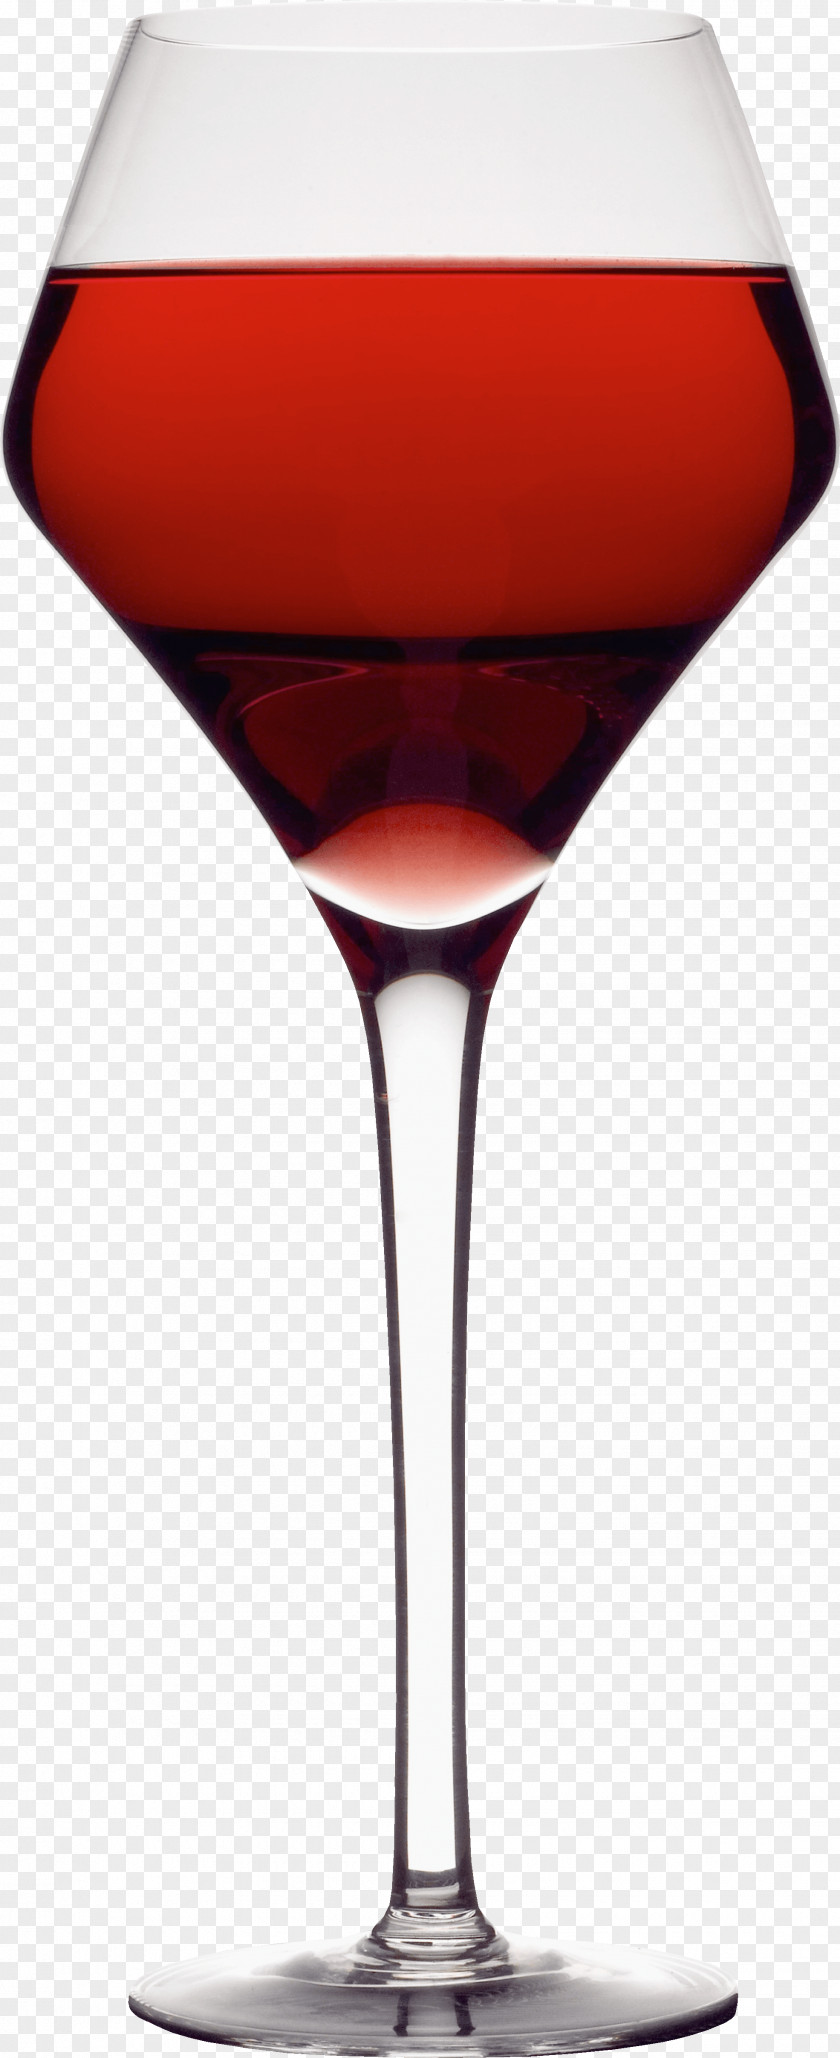 Glass Image Red Wine Cocktail Martini PNG